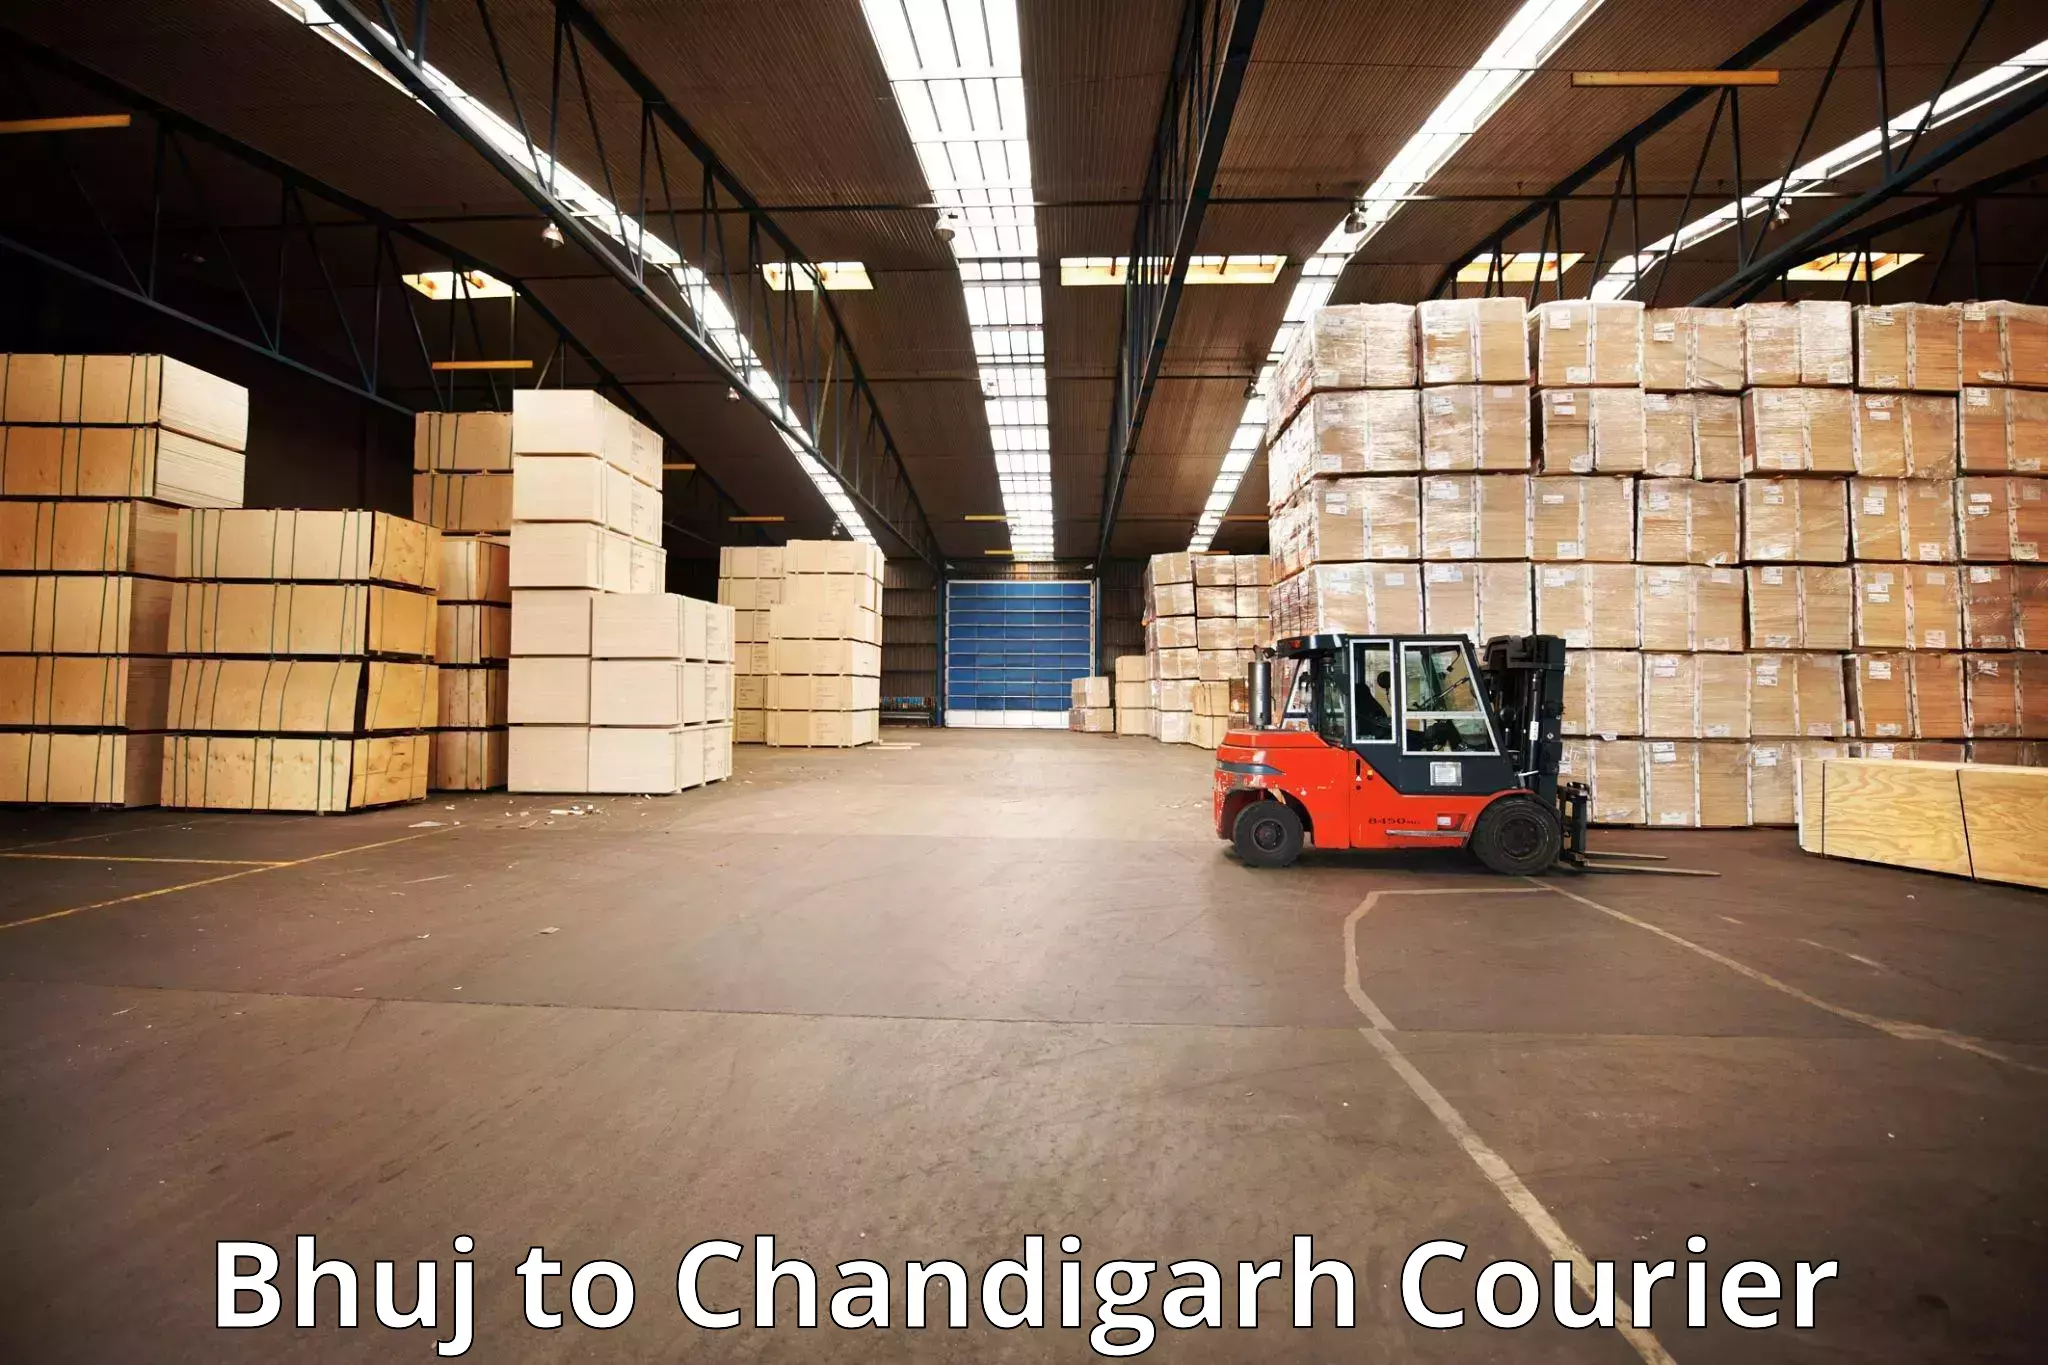 Luggage shipping specialists Bhuj to Chandigarh